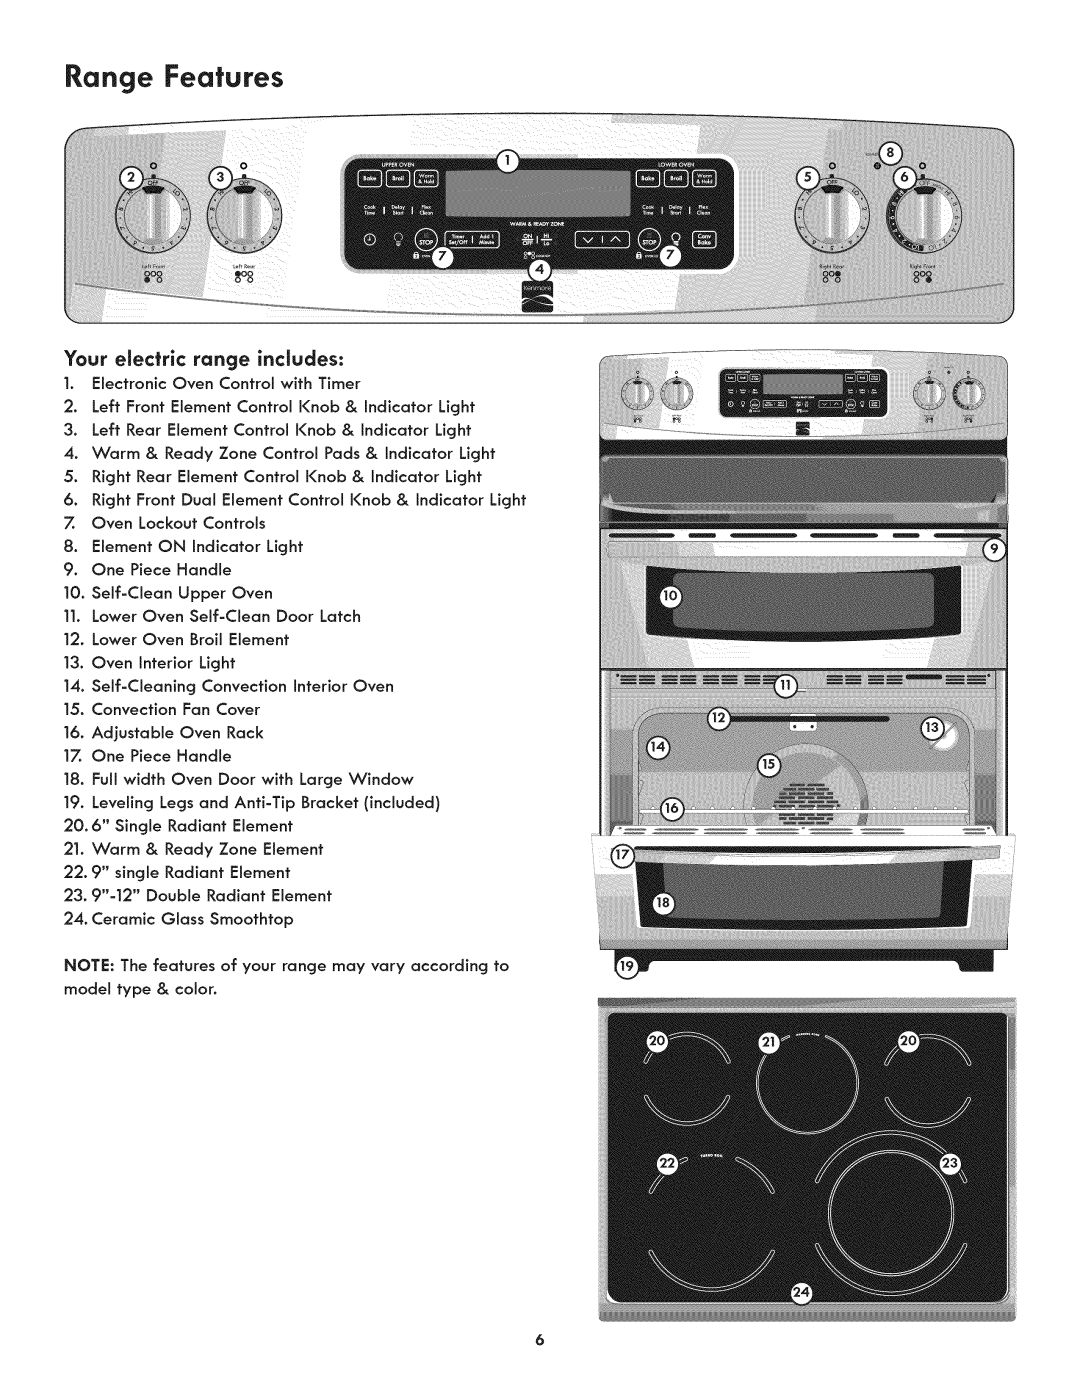 Kenmore 790.9805 manual Range Features, Your electric range includes 